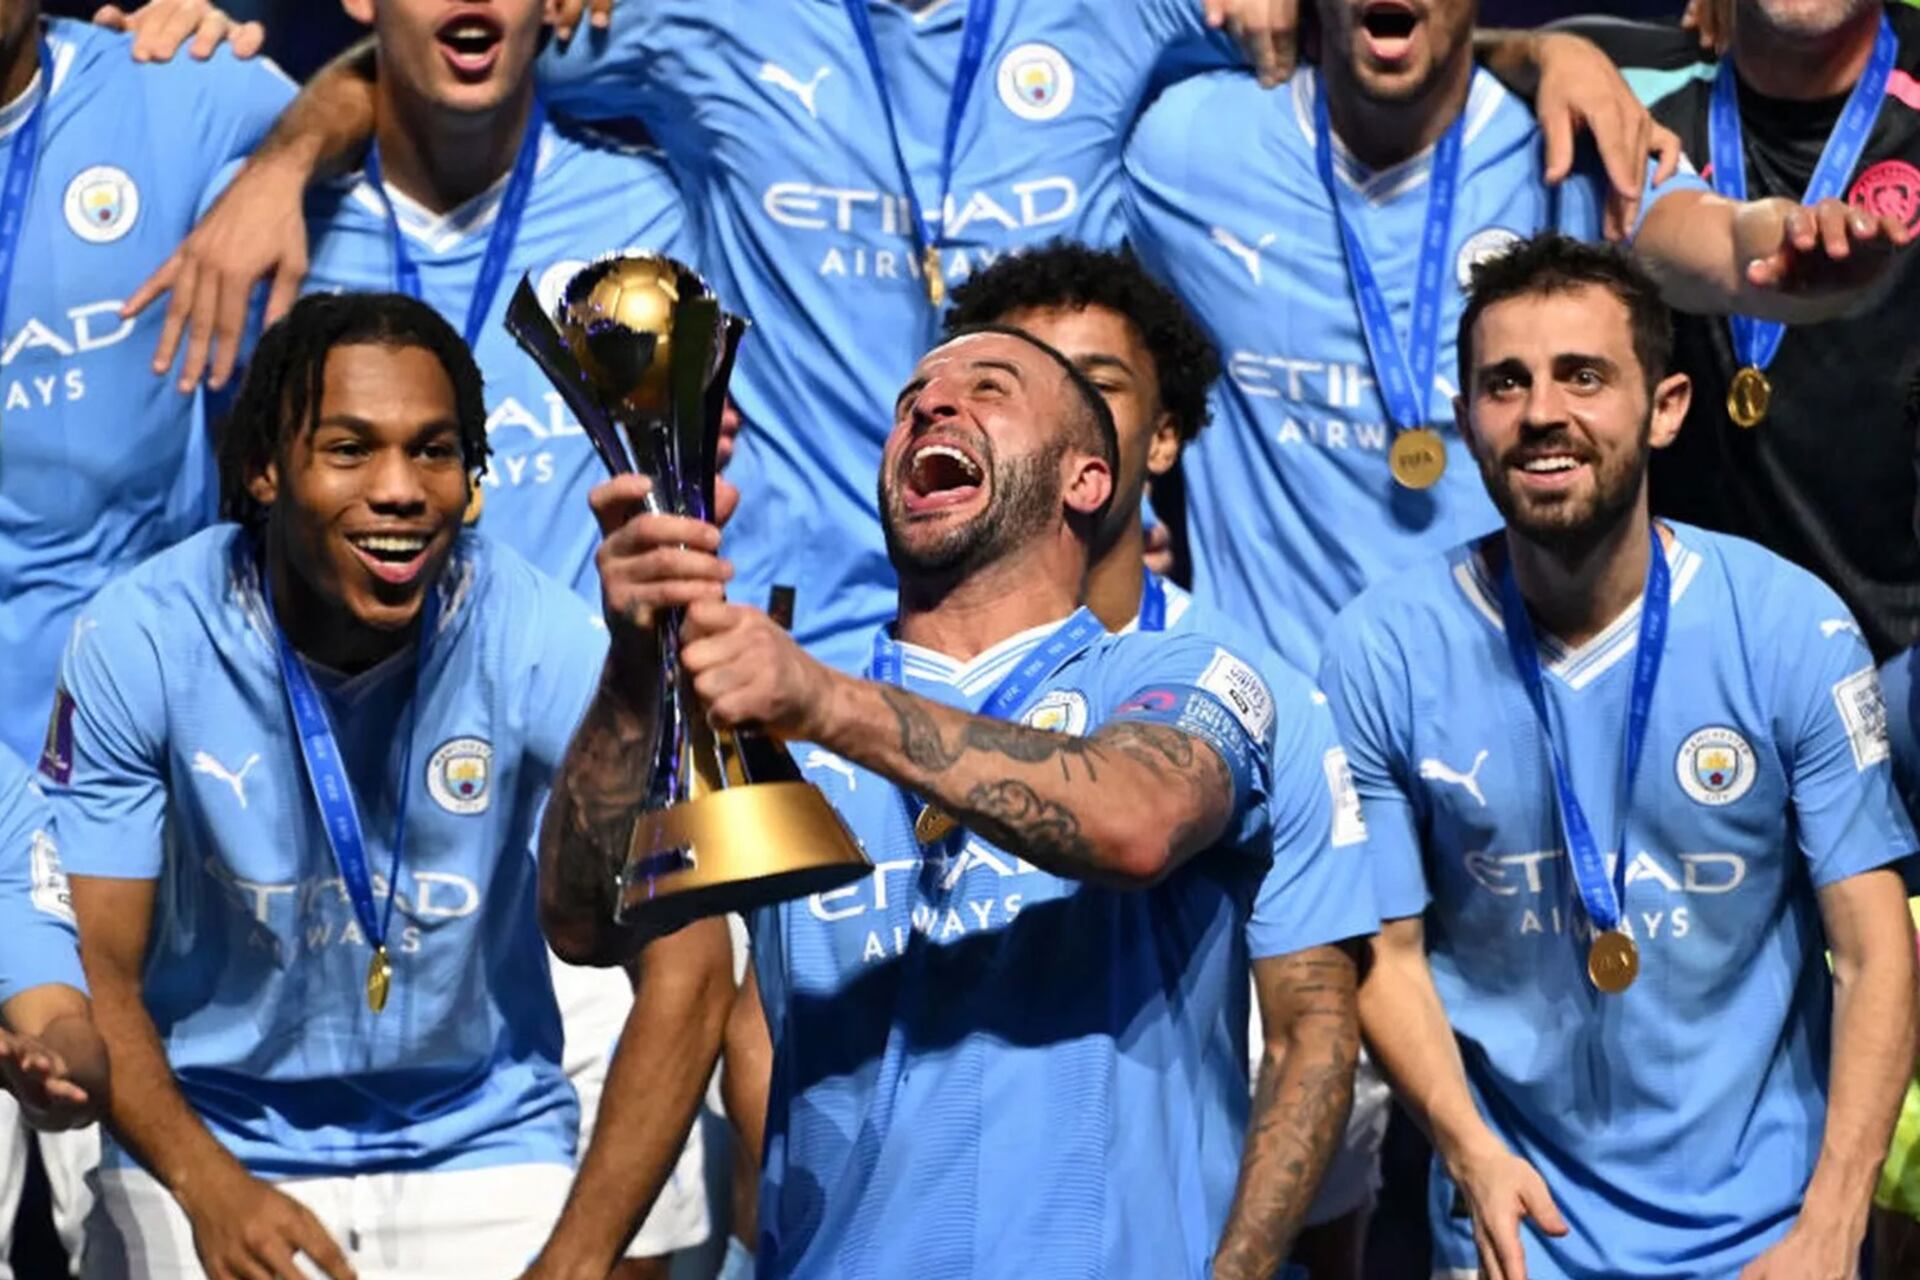 There will be changes, City enjoys the last World Cup as we will know it